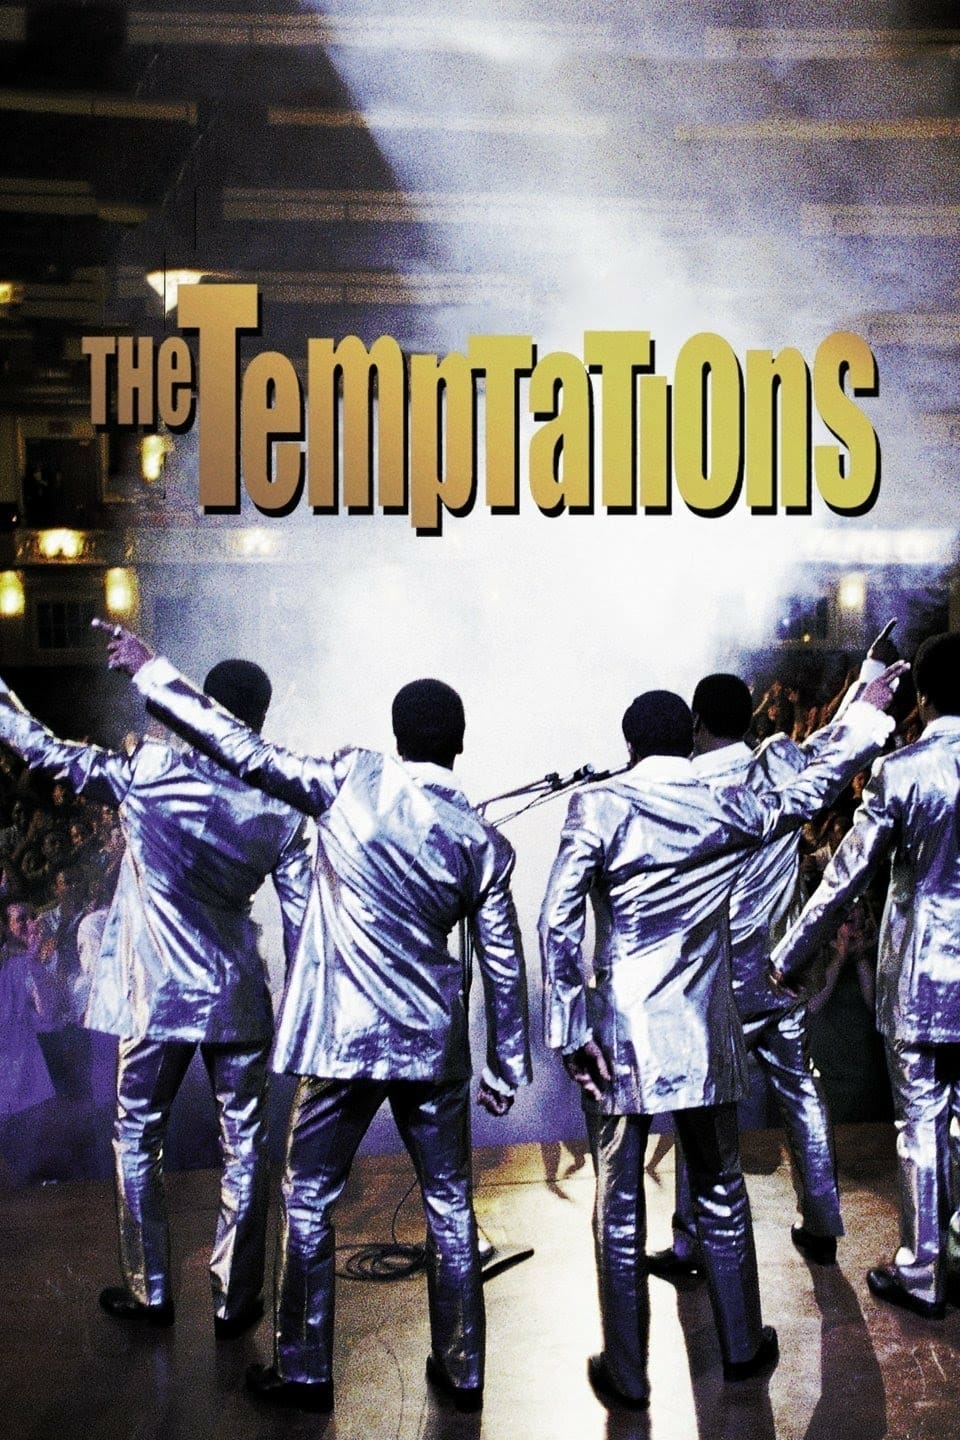 brian f jones recommends Watch The Temptations Free